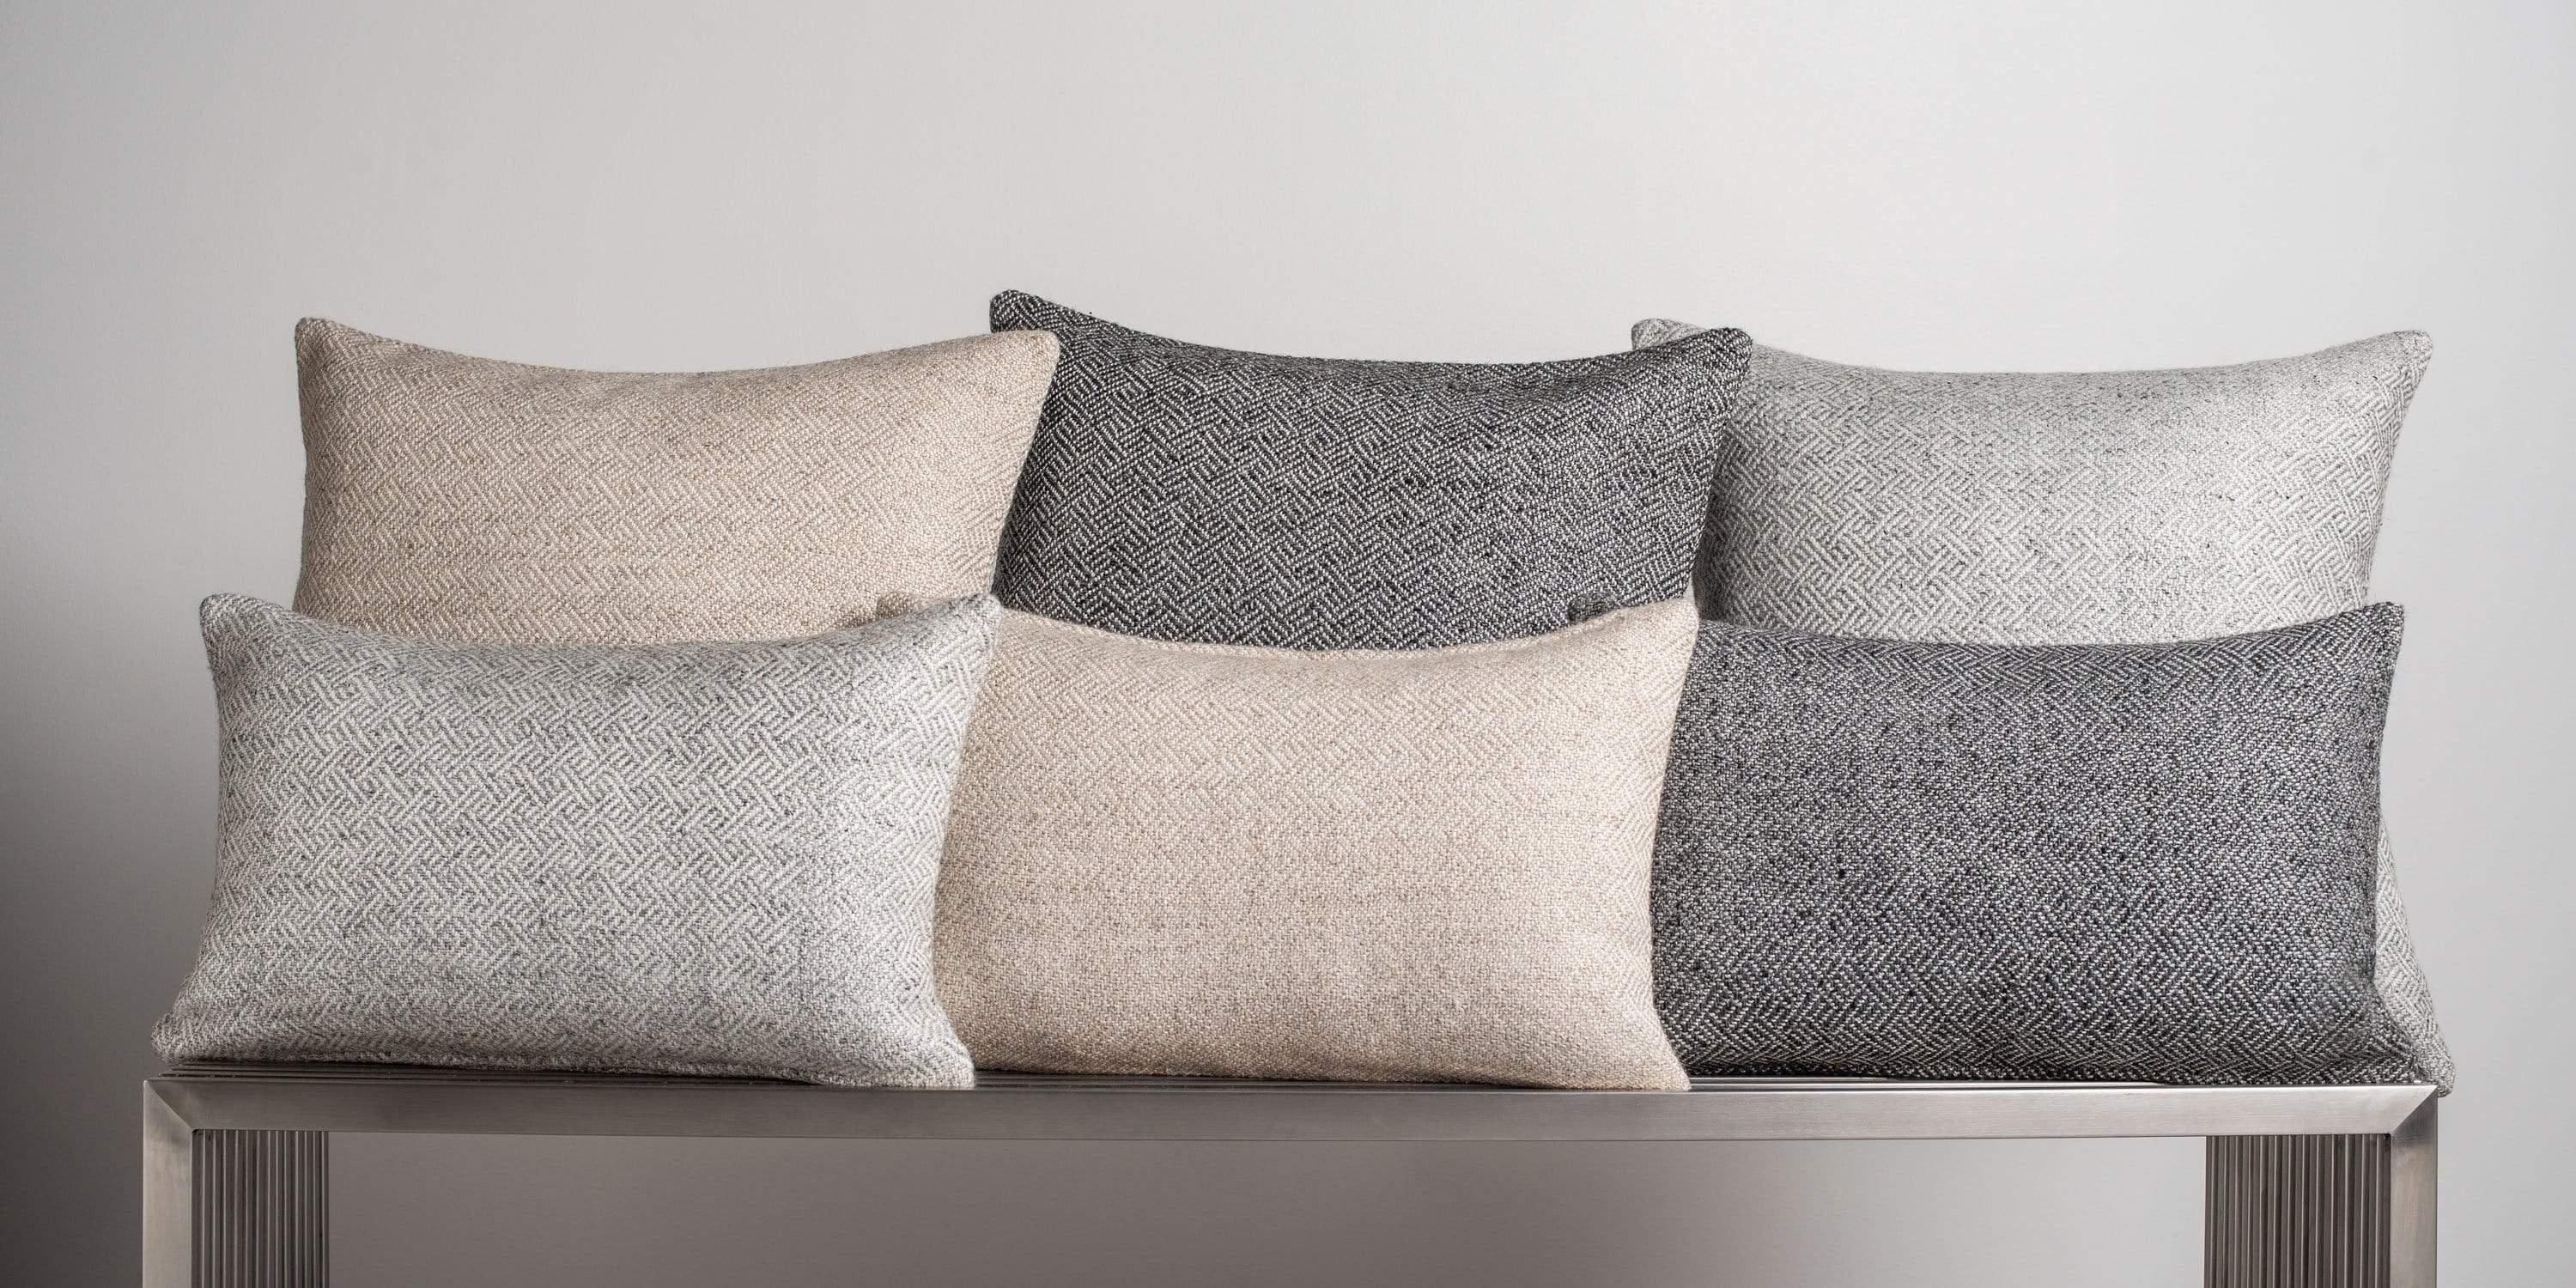 The perfect accent pillow, woven with a subtly modern angled diamond graphic is full of texture and depth creating contrast when paired with our sumptuous cashmere pillows. Pillow insert sold separately.

Size 13